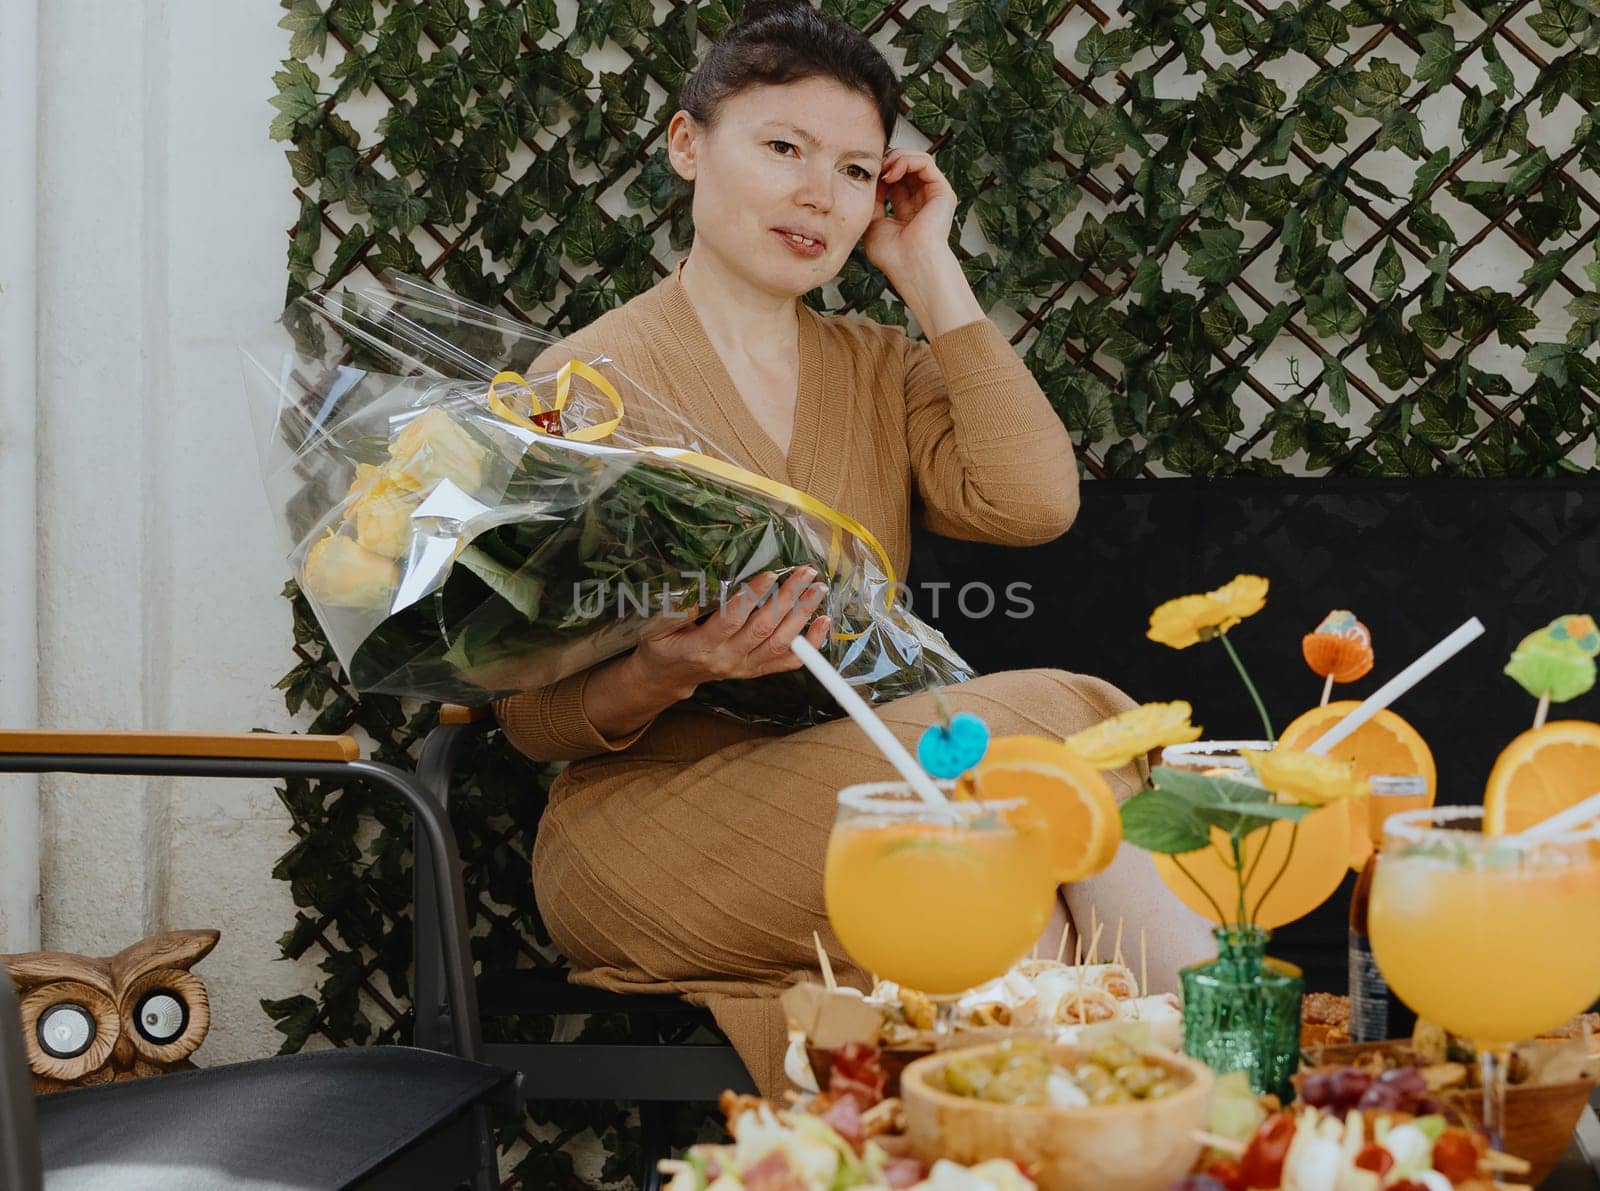 Portrait of one young beautiful Caucasian brunette girl in a knitted dress holding a bouquet of yellow roses in her hands, sitting on a garden chair in the backyard of a house on a spring sunny day and thoughtfully looking to the side, straightening her hair with her hand, celebrating her birthday, side view close-up.